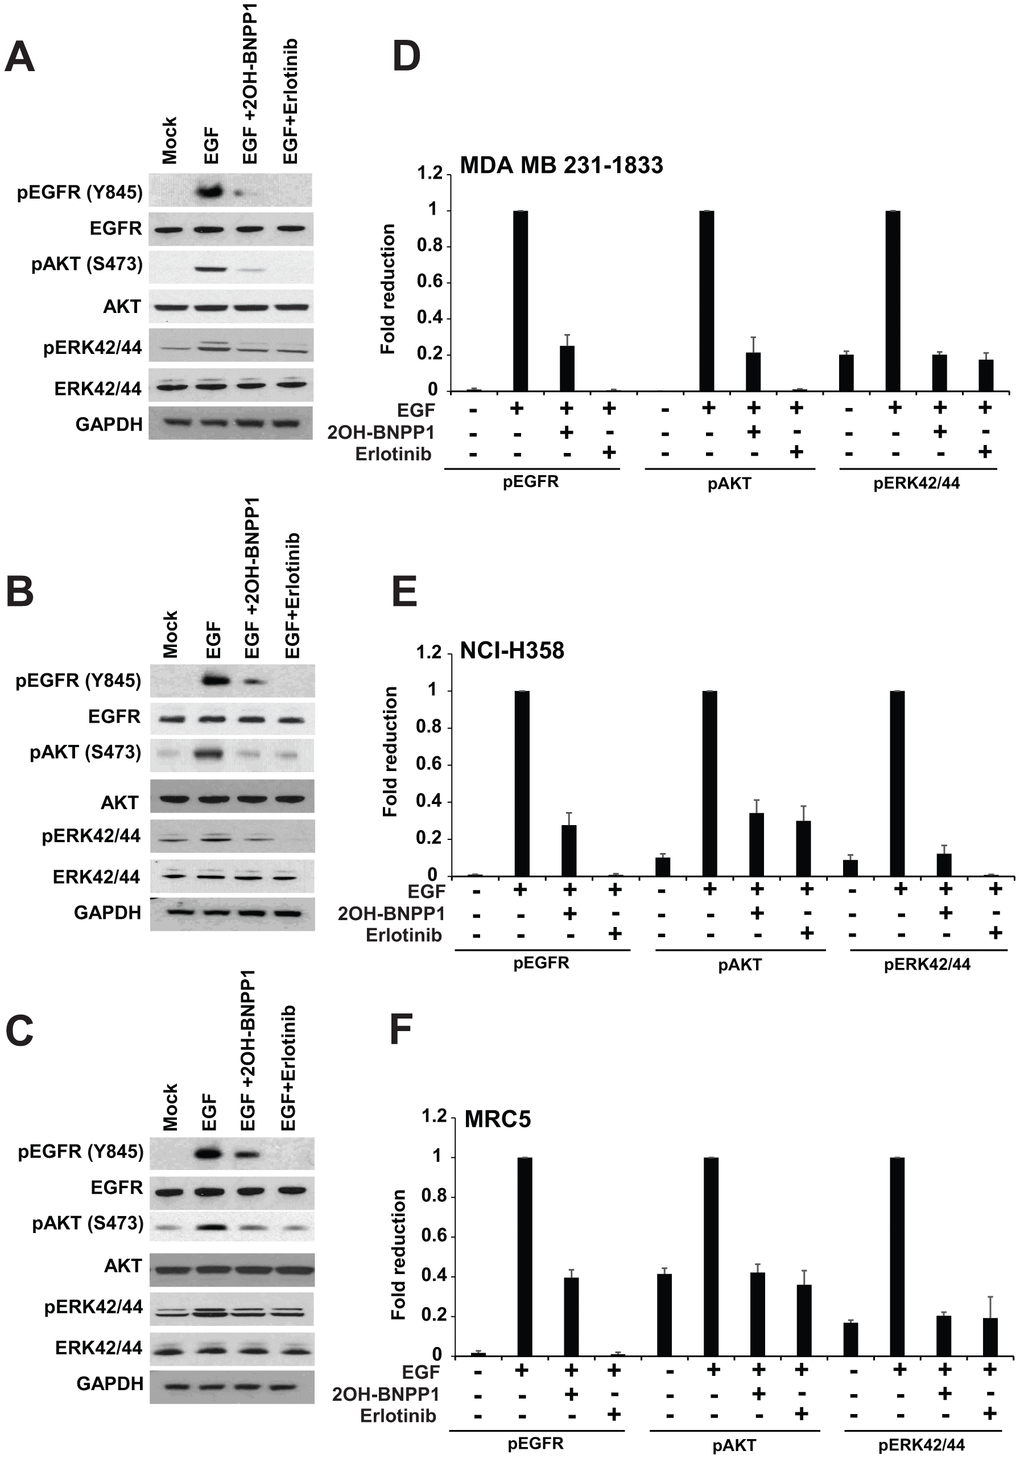 BUB1 inhibition blocks EGFR signaling. MDA-MB-231-1833 (A) NCI-H358 (B) and MRC5 (C) cells were starved and pretreated with BUB1 kinase inhibitor 2OH-BNPP1 (10 μM) or EGFR inhibitor erlotinib (10 μM) for 1 hour followed by EGF (30 ng/mL) treatment for an additional 30 minutes. Resulting lysates were run on 4-12% Bis-Tris SDS-PAGE gels, transferred to PVDF membranes and probed with indicated antibodies. (D–F) western blots for phosphorylated proteins from (A–C) were quantitated (three separate biological repeats) using ImageJ and plotted.